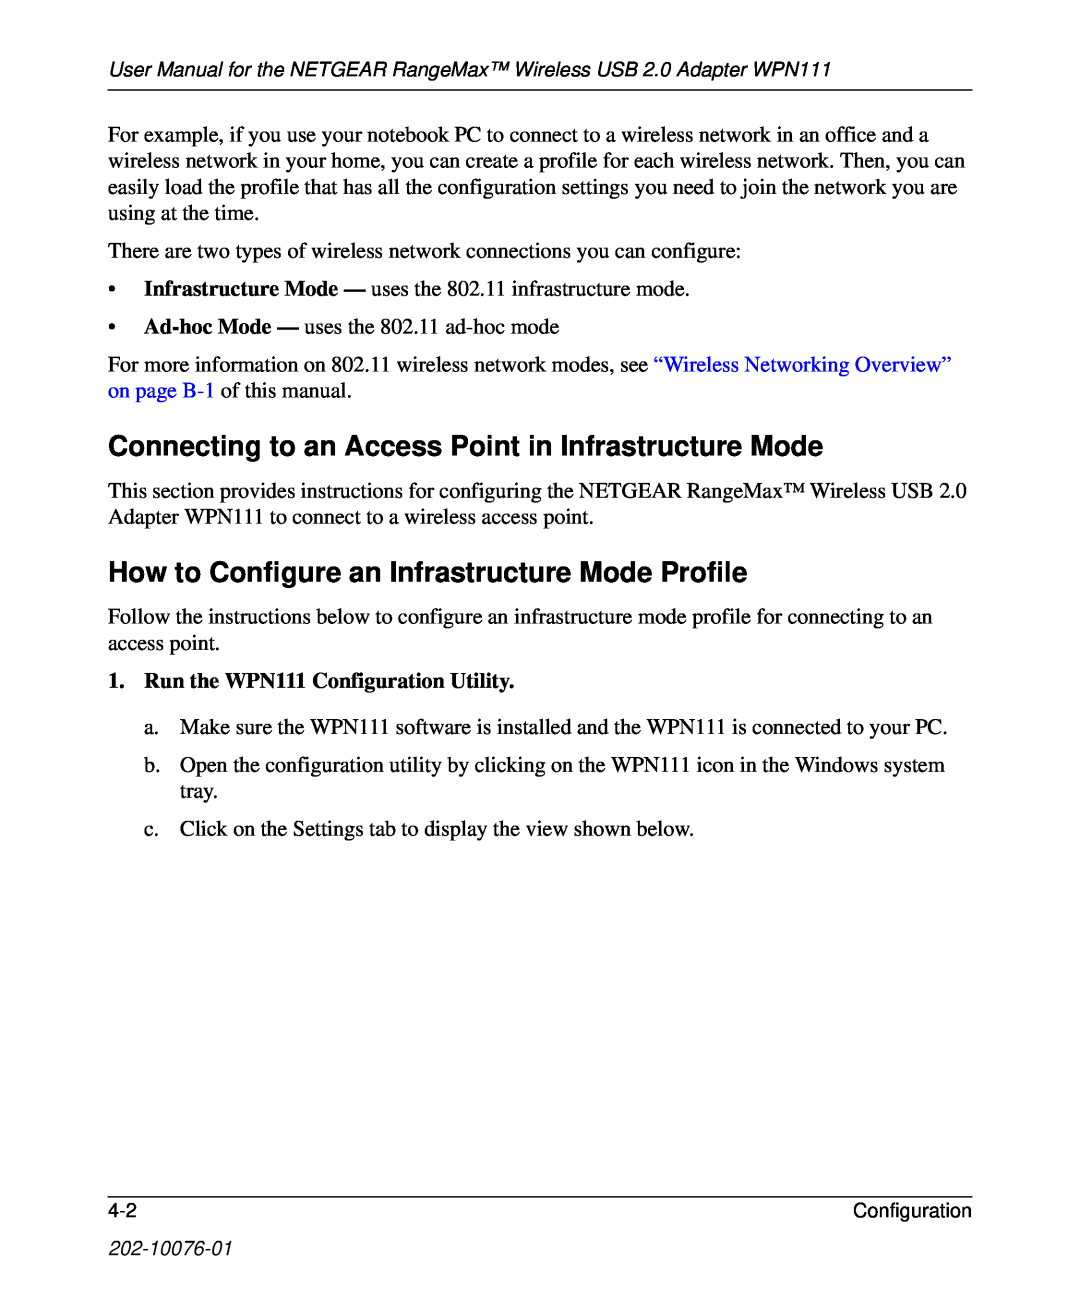 NETGEAR WPN111 Connecting to an Access Point in Infrastructure Mode, How to Configure an Infrastructure Mode Profile 